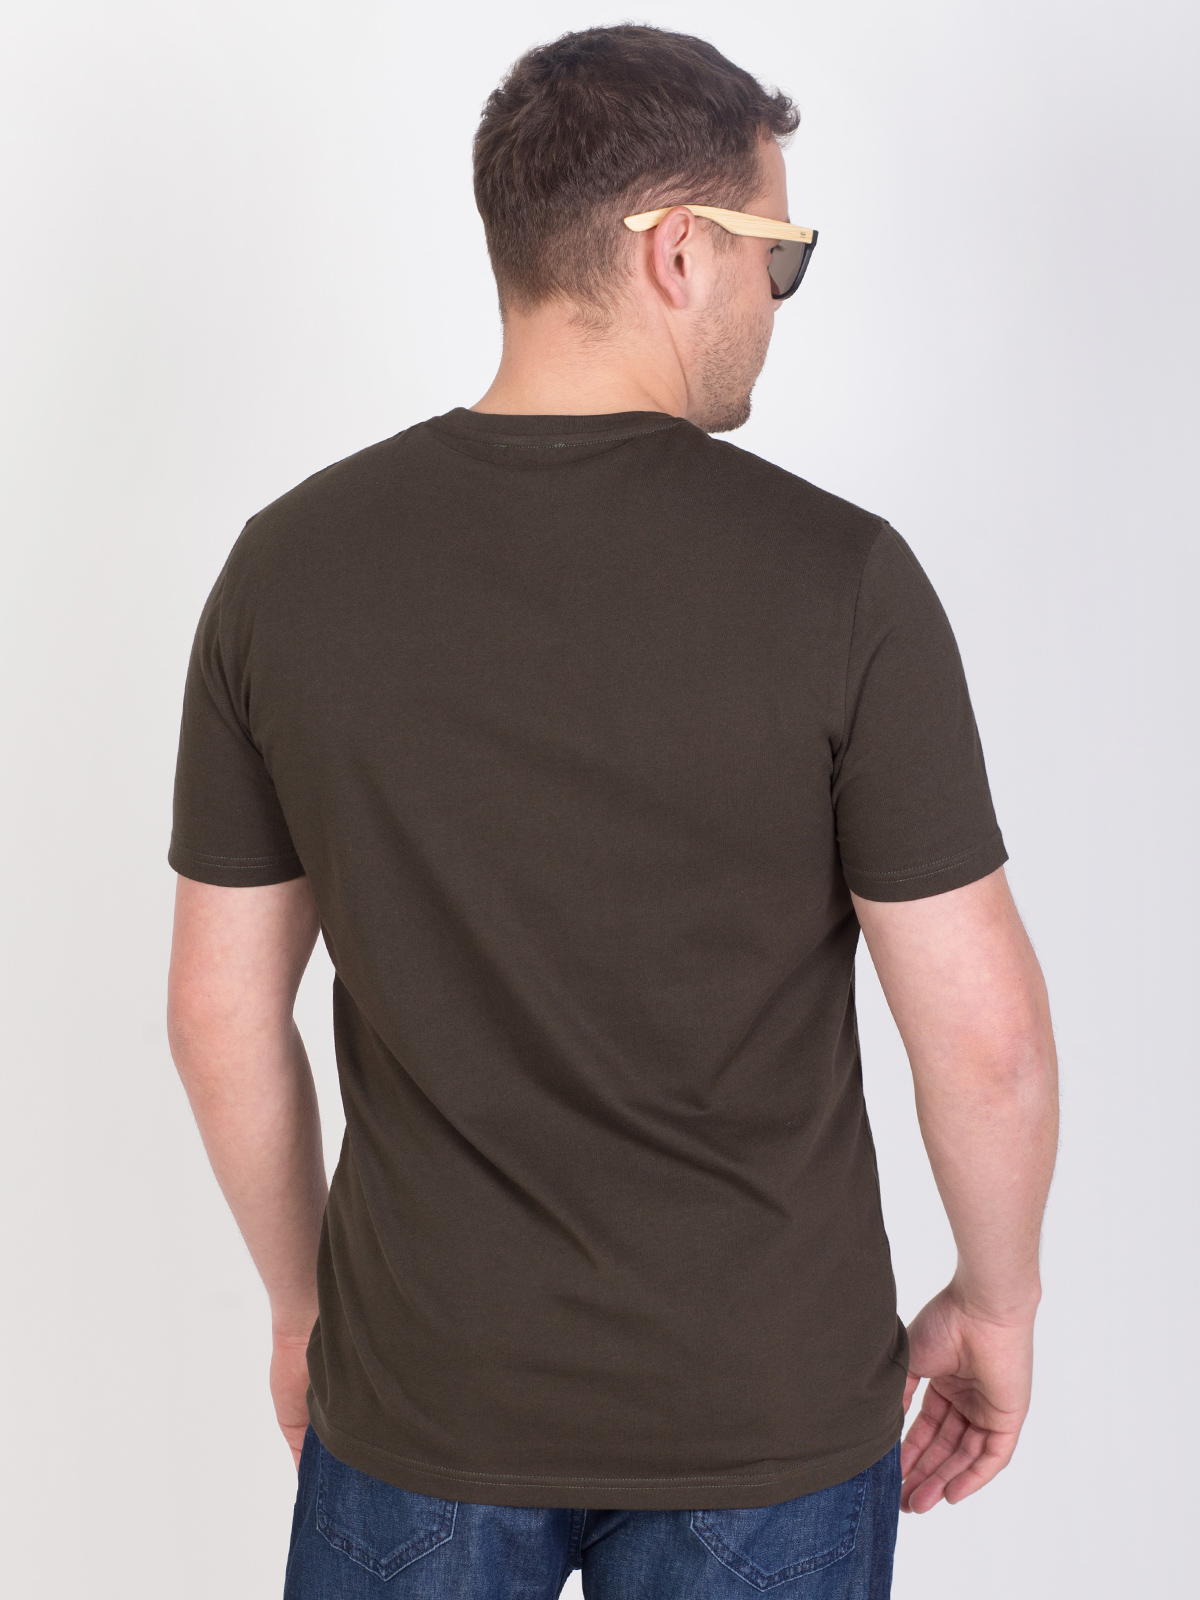 Tshirt in khaki with color print - 96428 € 16.31 img4